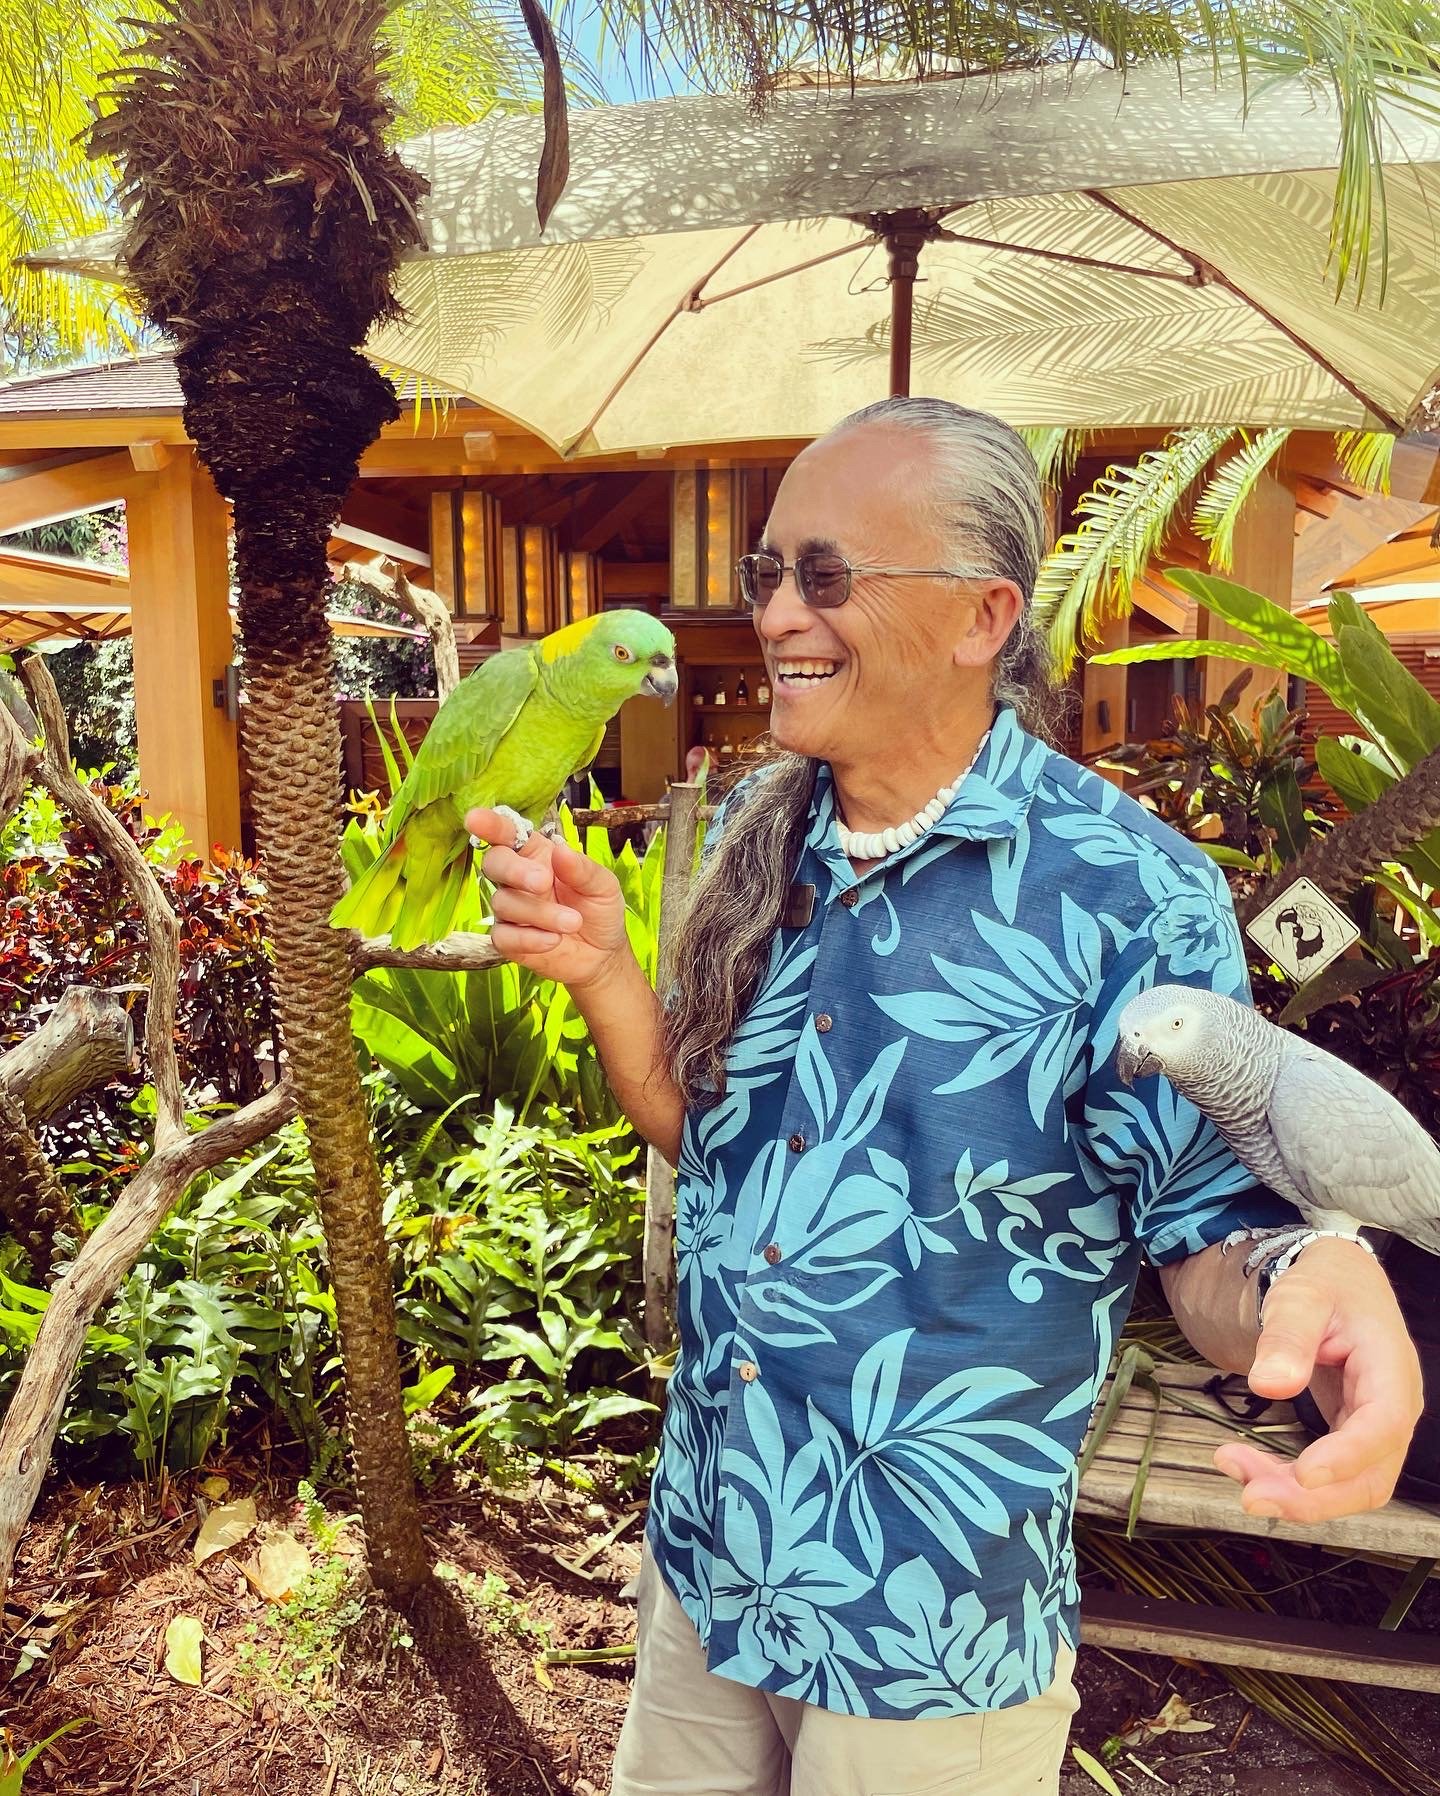 The bird whisperer in residence at Four Seasons Lanai shares a moment with his not-so-foul fowl.jpg